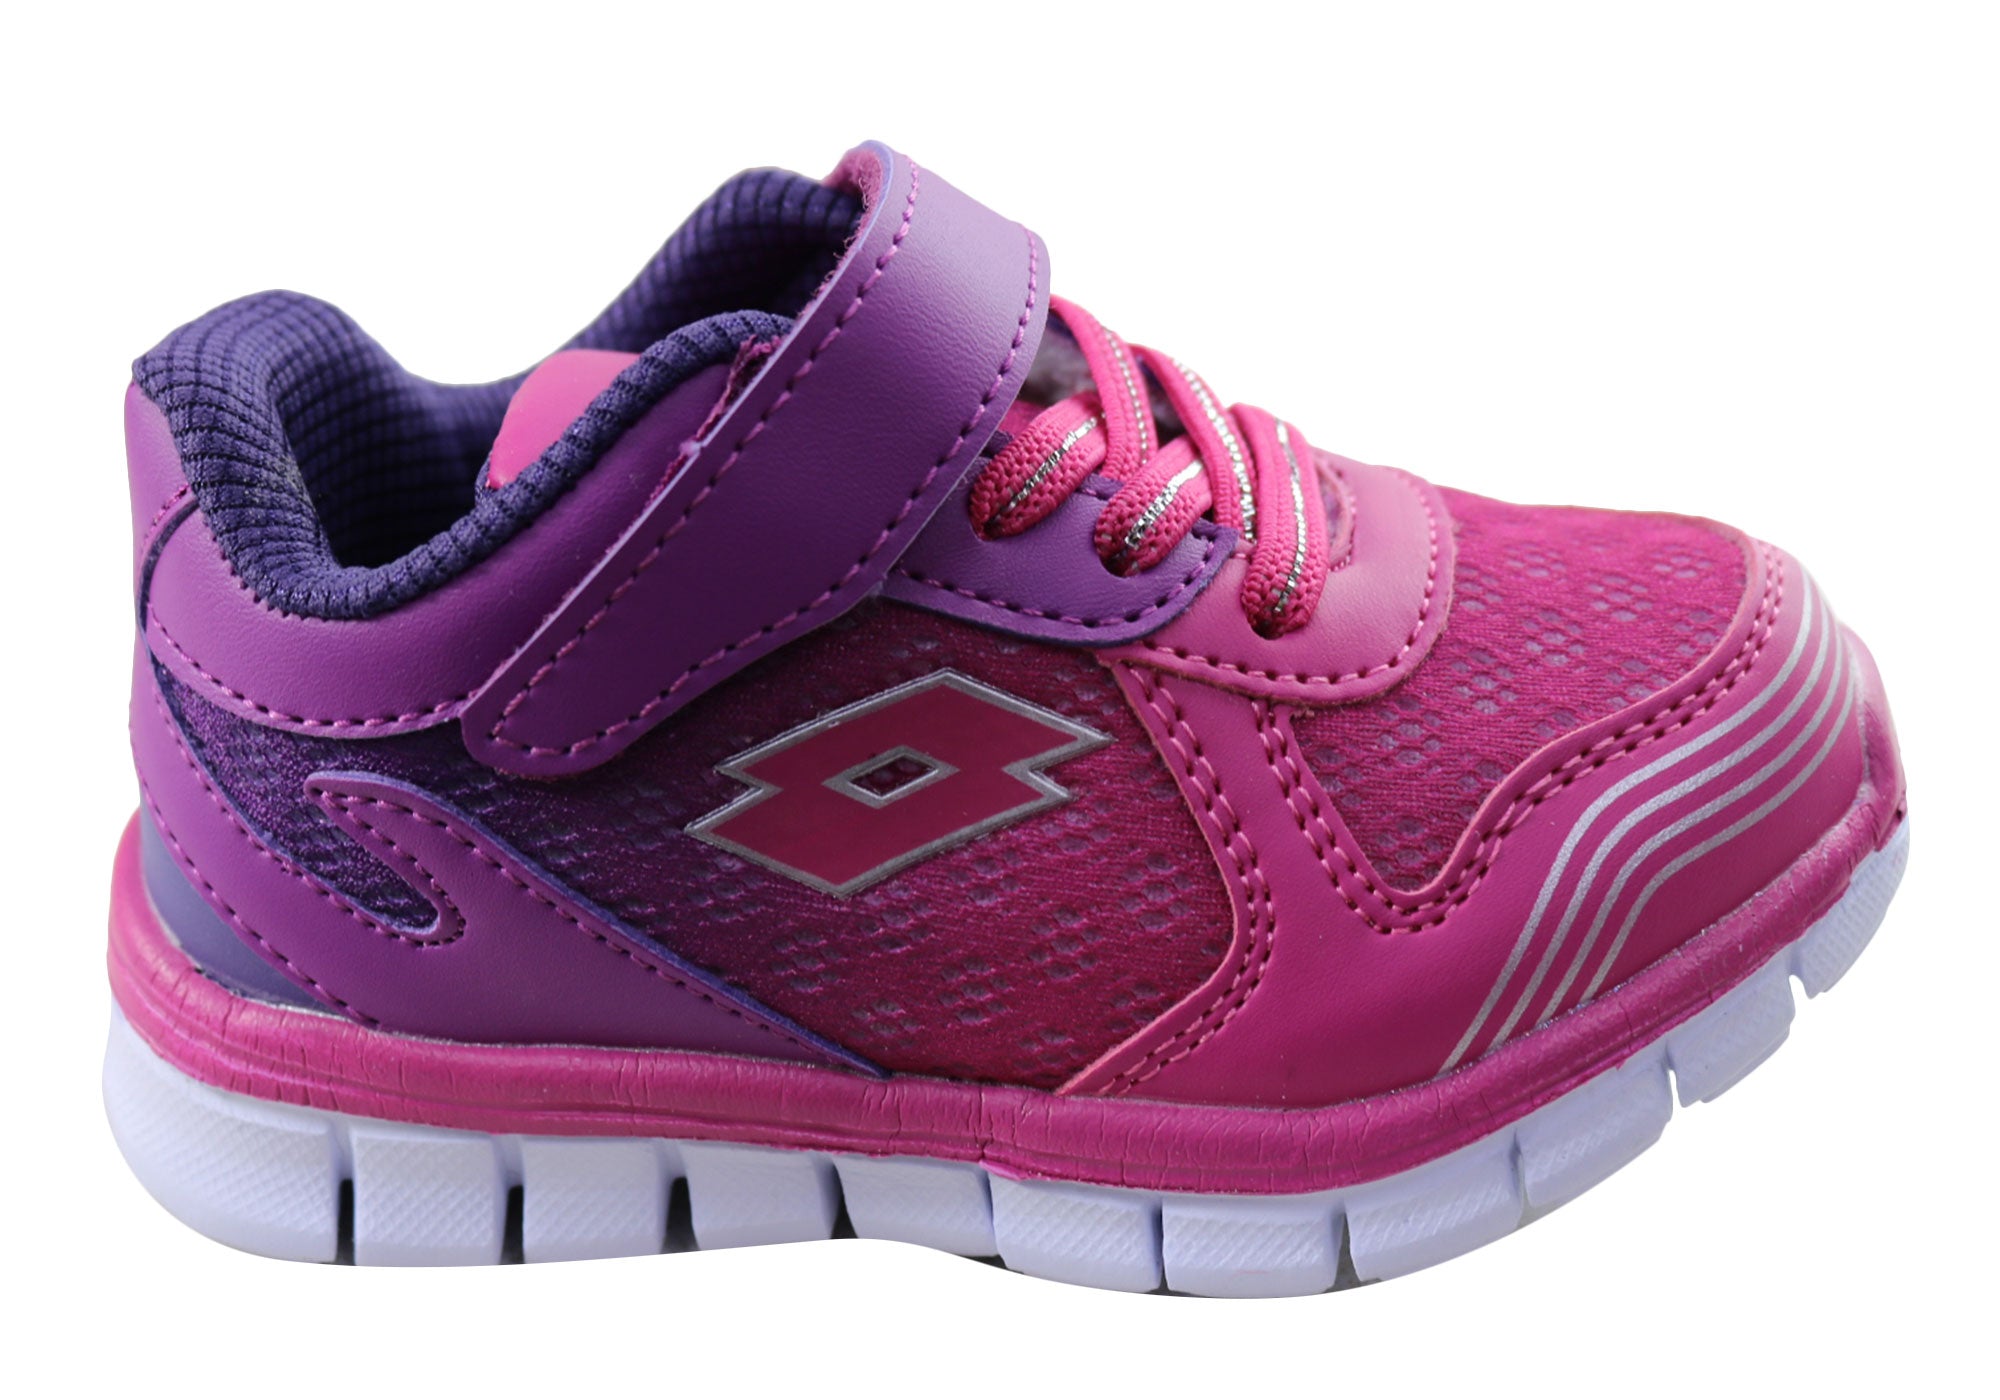 LOTTO Truant Running Shoes For Men - Buy Navy Color LOTTO Truant Running  Shoes For Men Online at Best Price - Shop Online for Footwears in India |  Flipkart.com | Running shoes